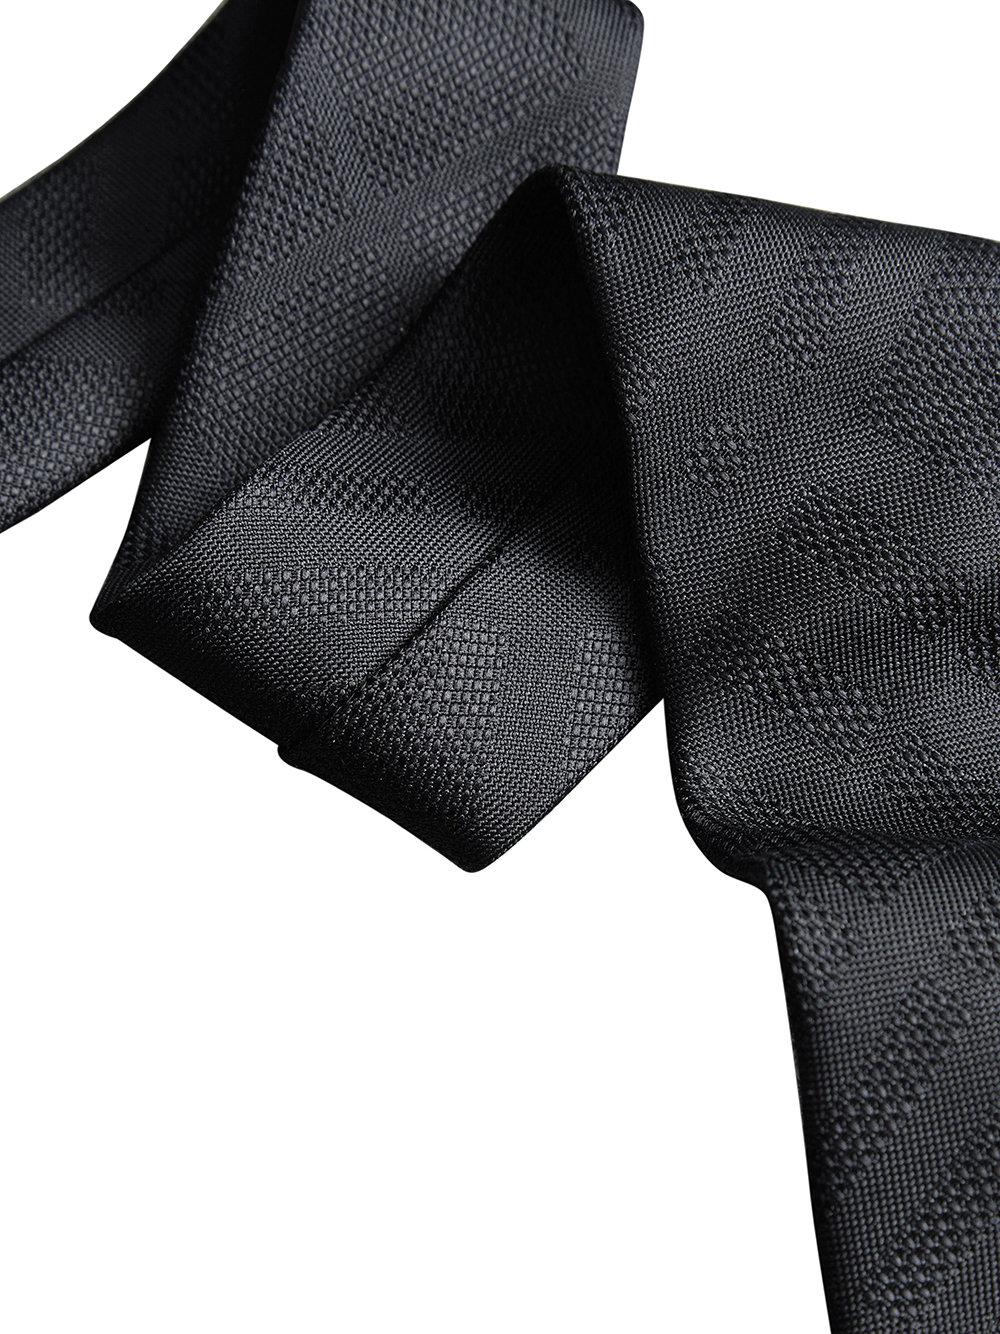 Burberry Modern Cut Check Tie in Black for Men | Lyst